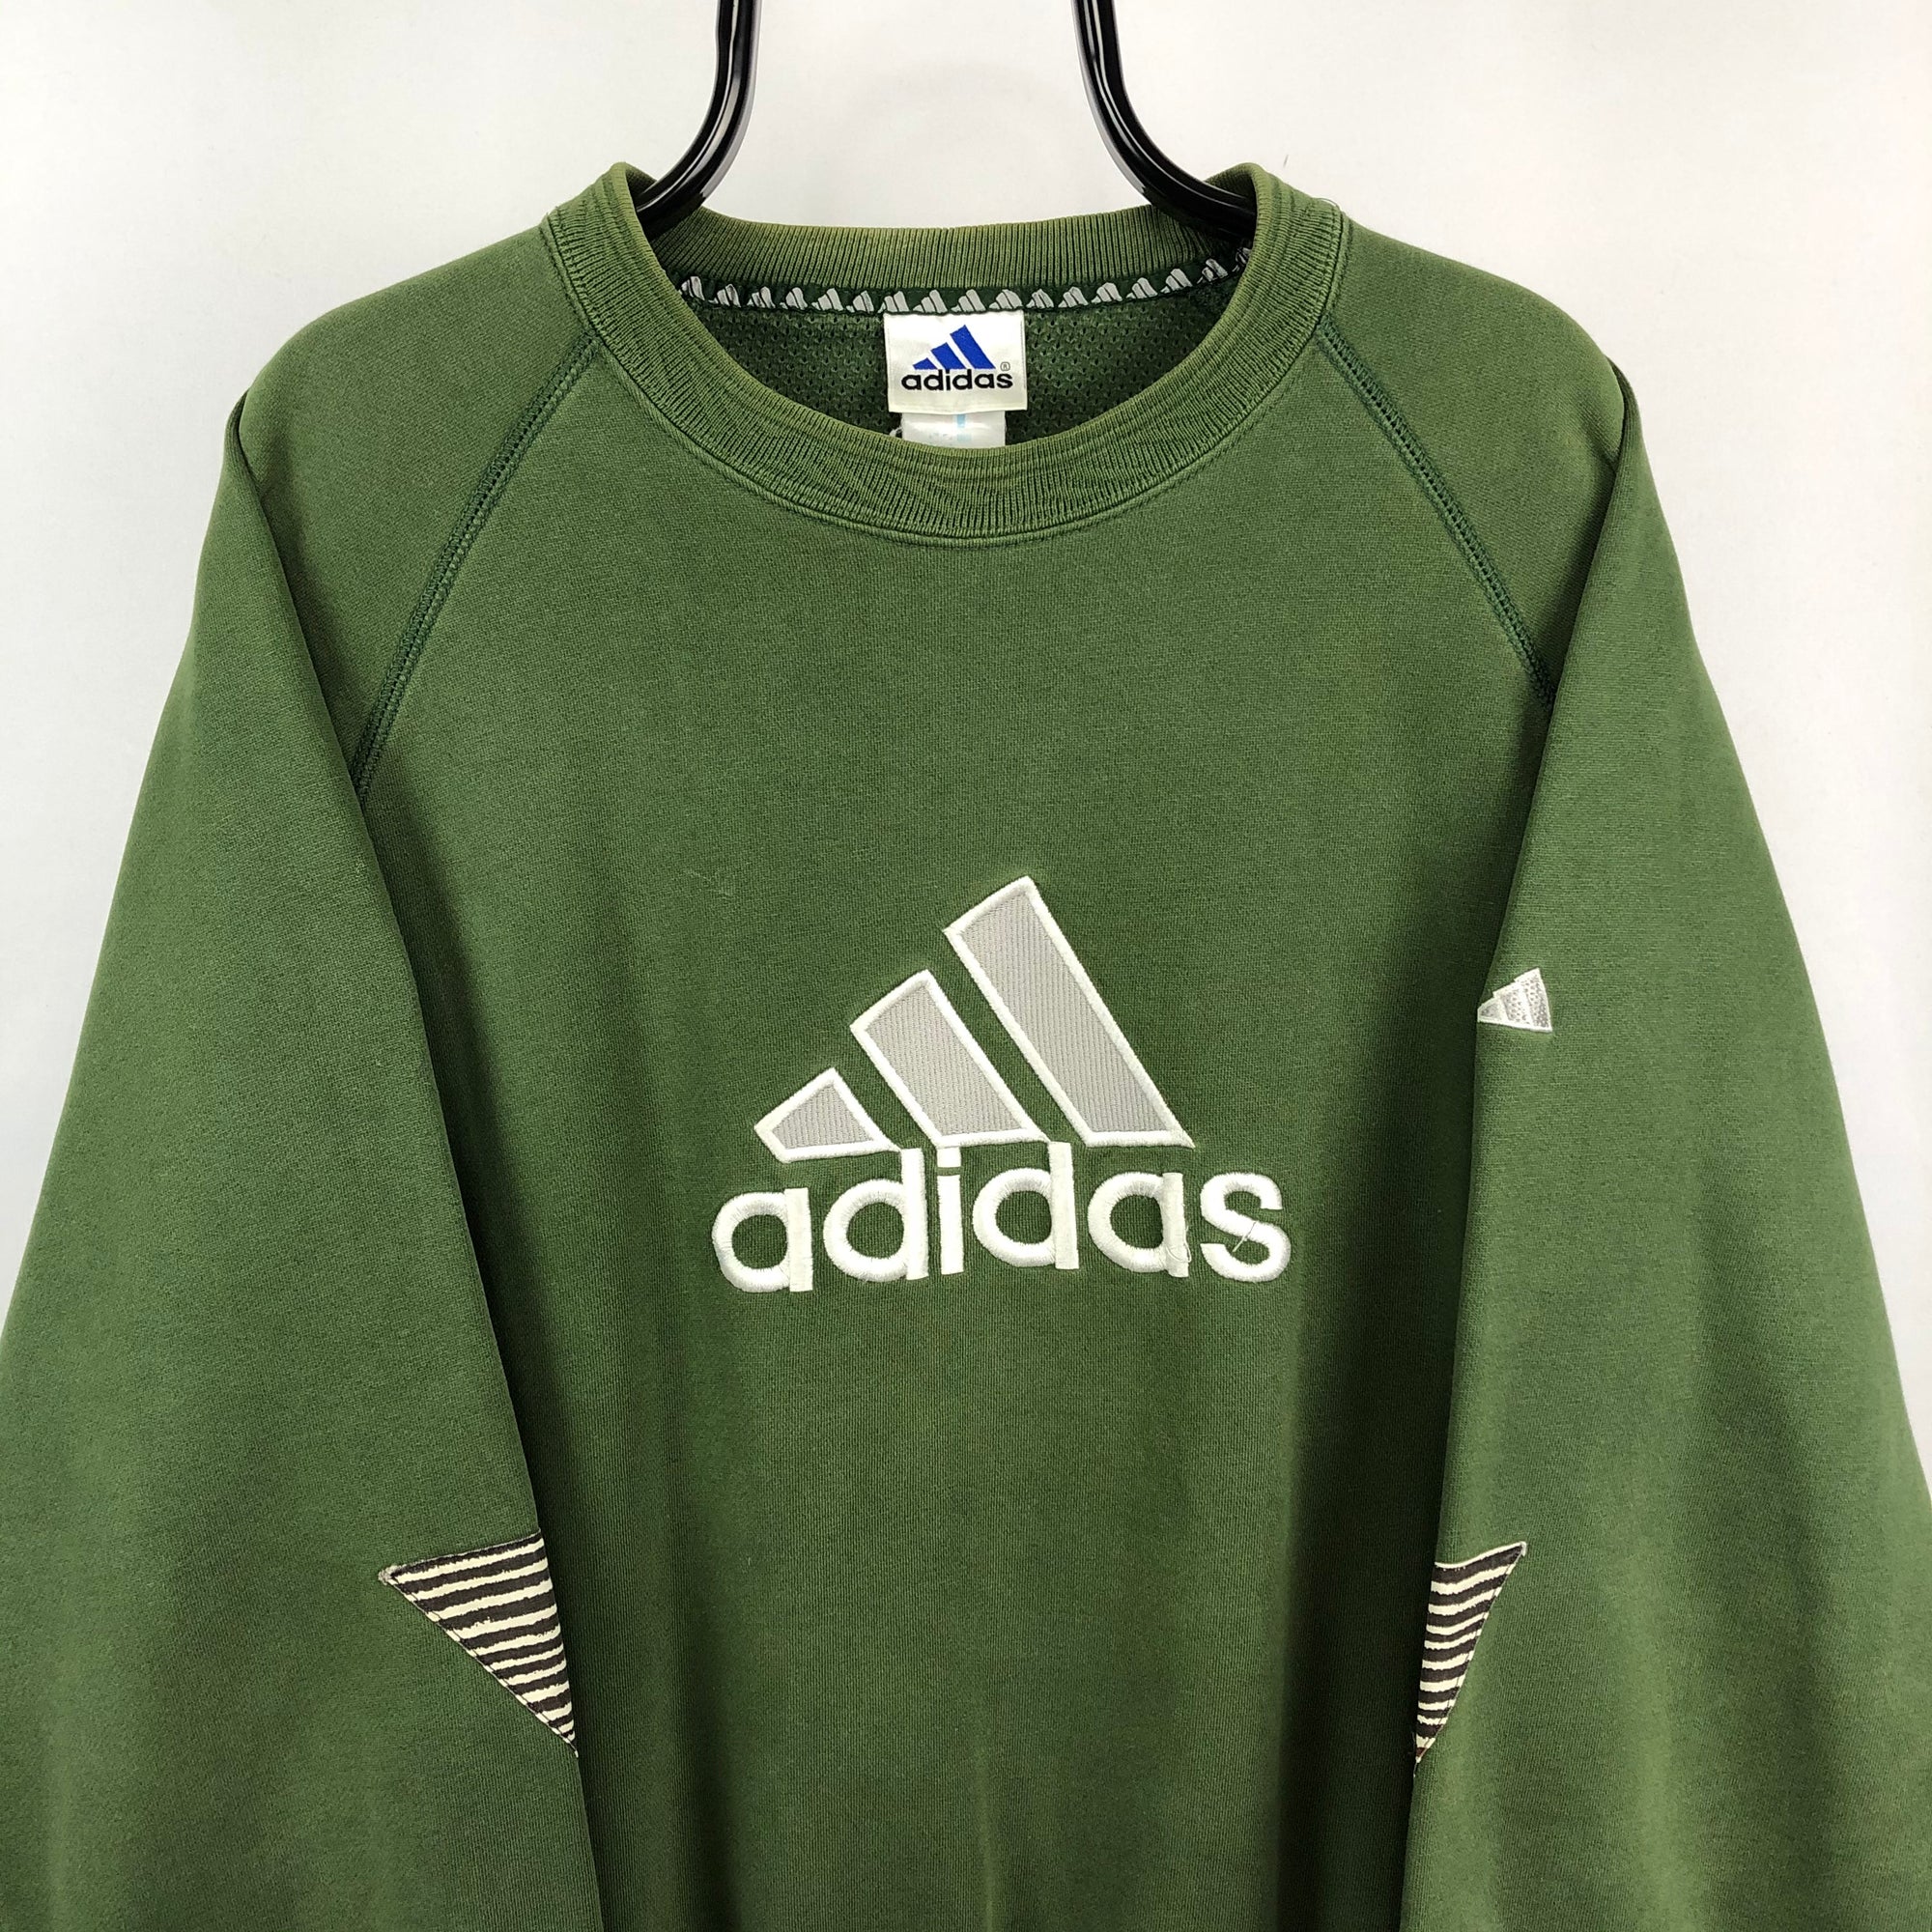 Vintage 90s Adidas Spellout Sweatshirt in Forest Green - Men's Large/Women's XL